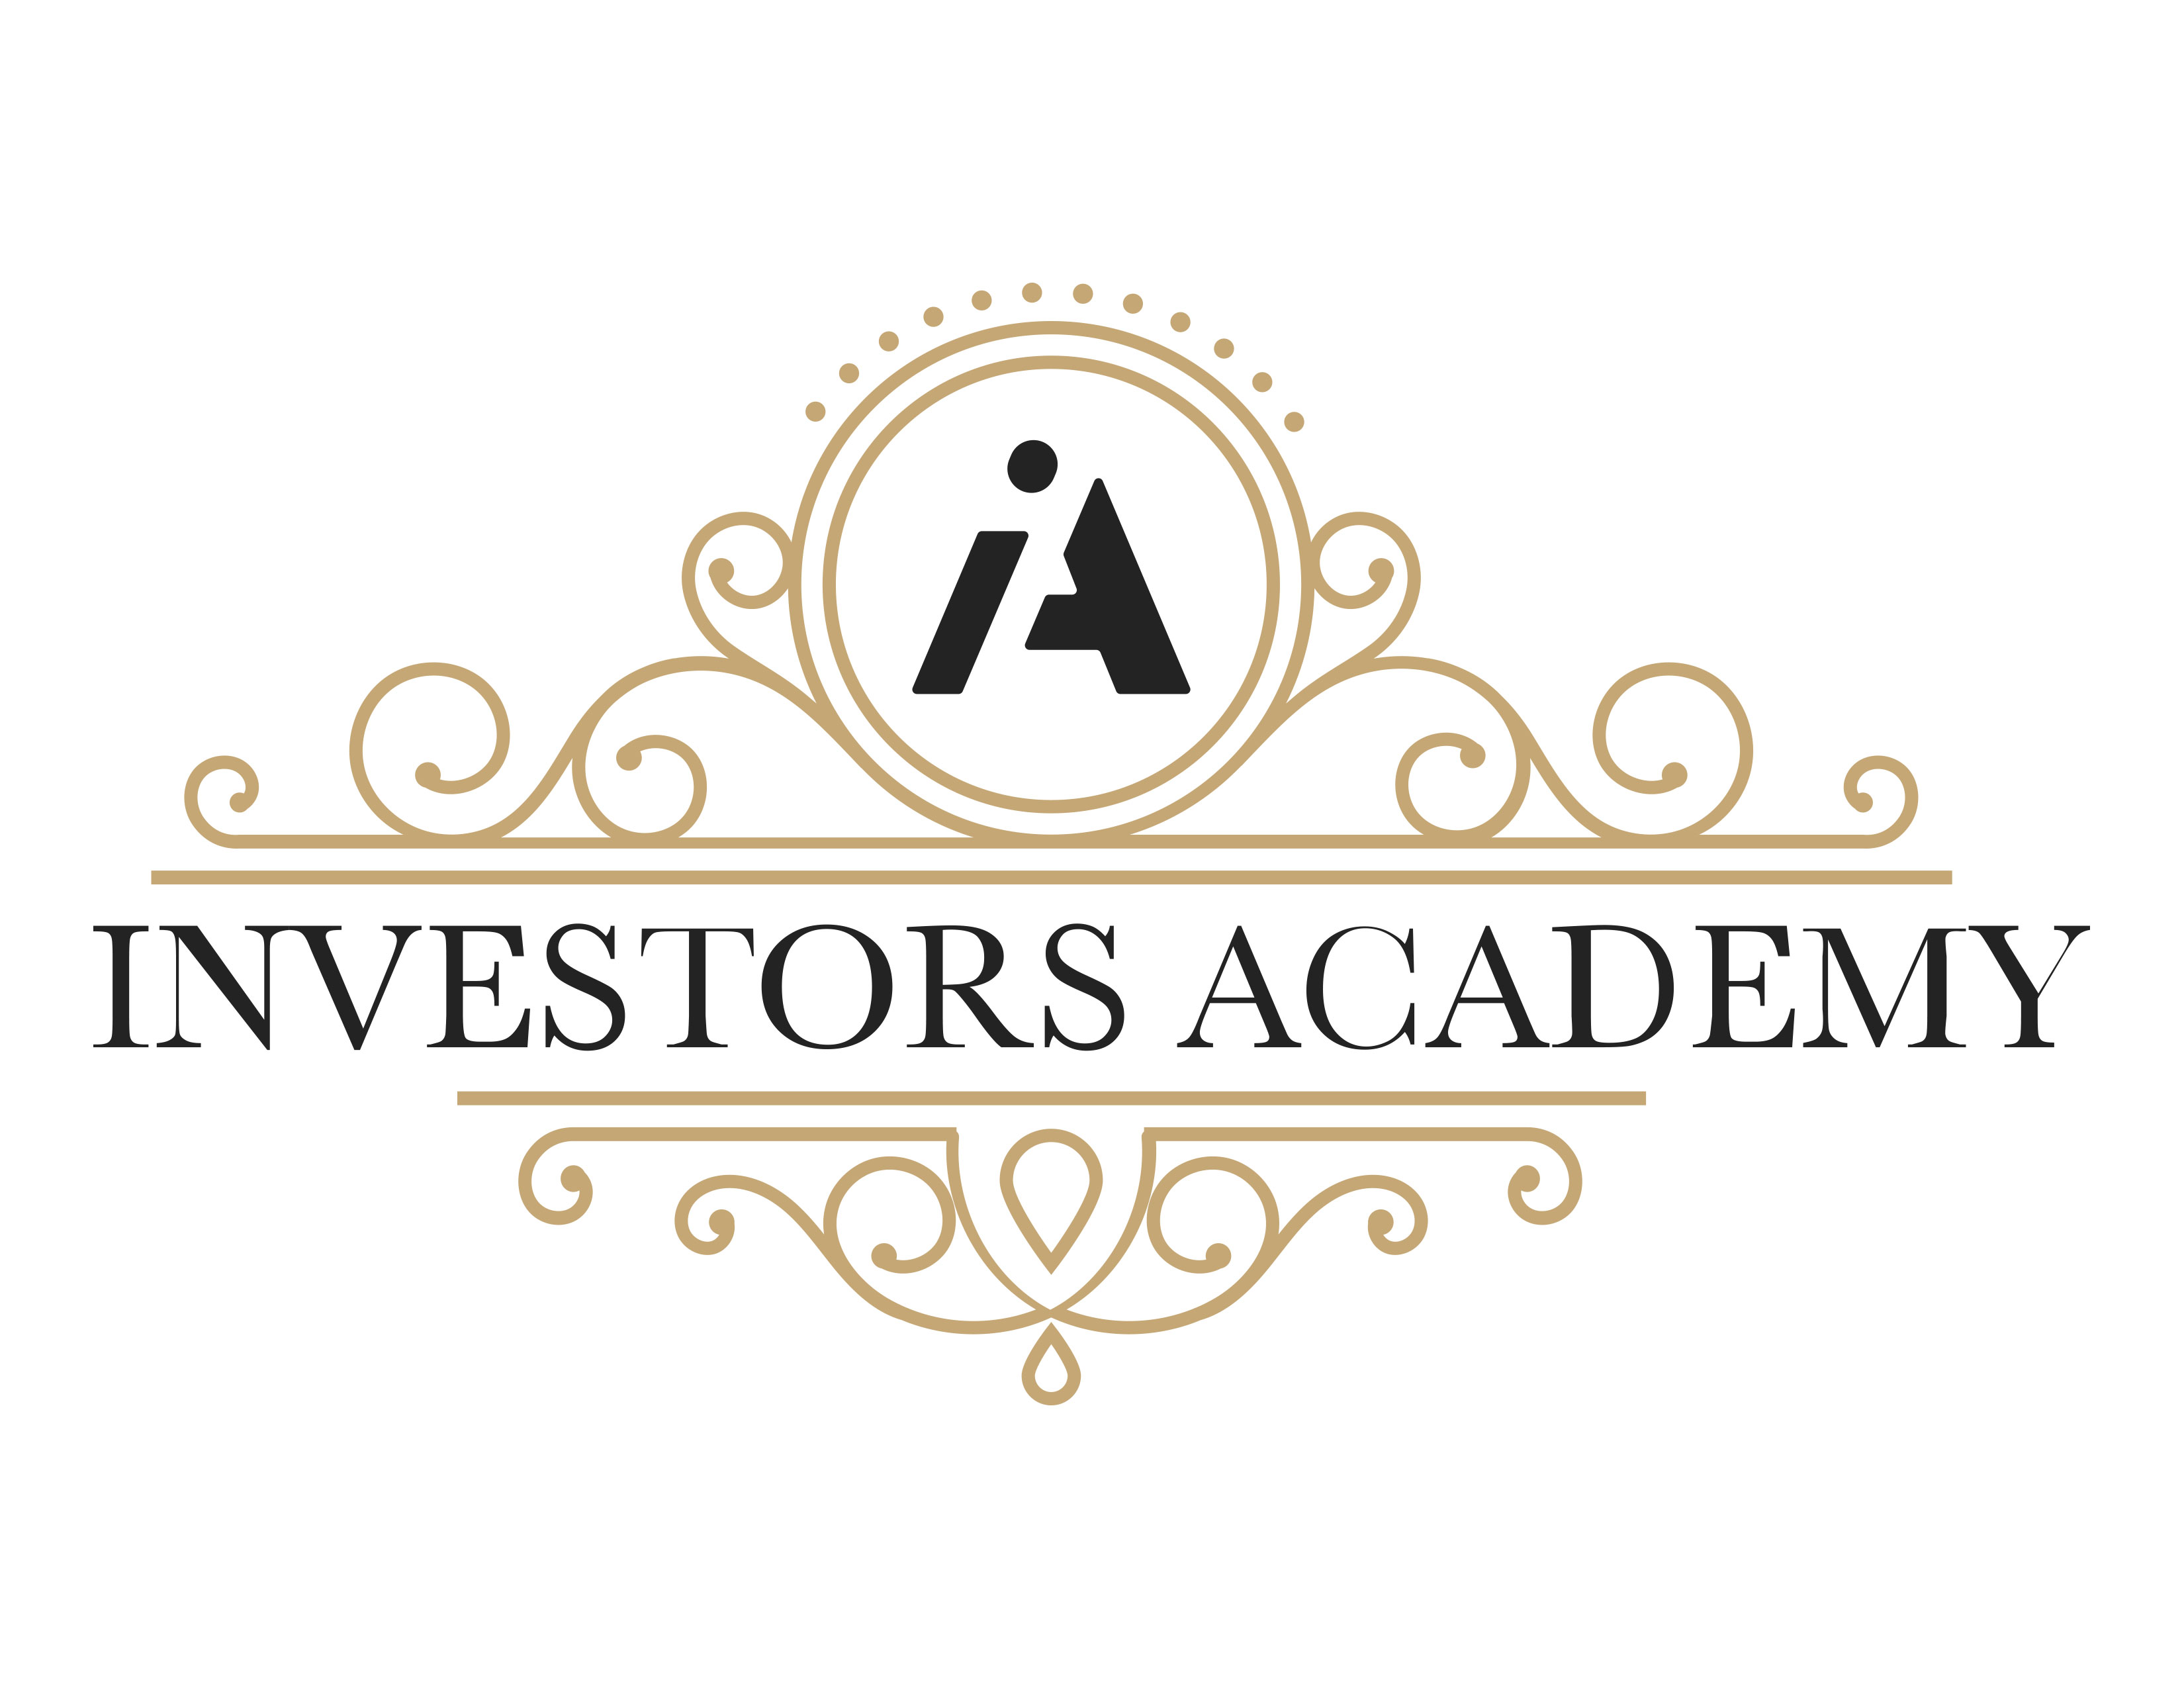 The Investors Academy is Officially Opening the Doors to Its Community Resource Center on June 29, 2019